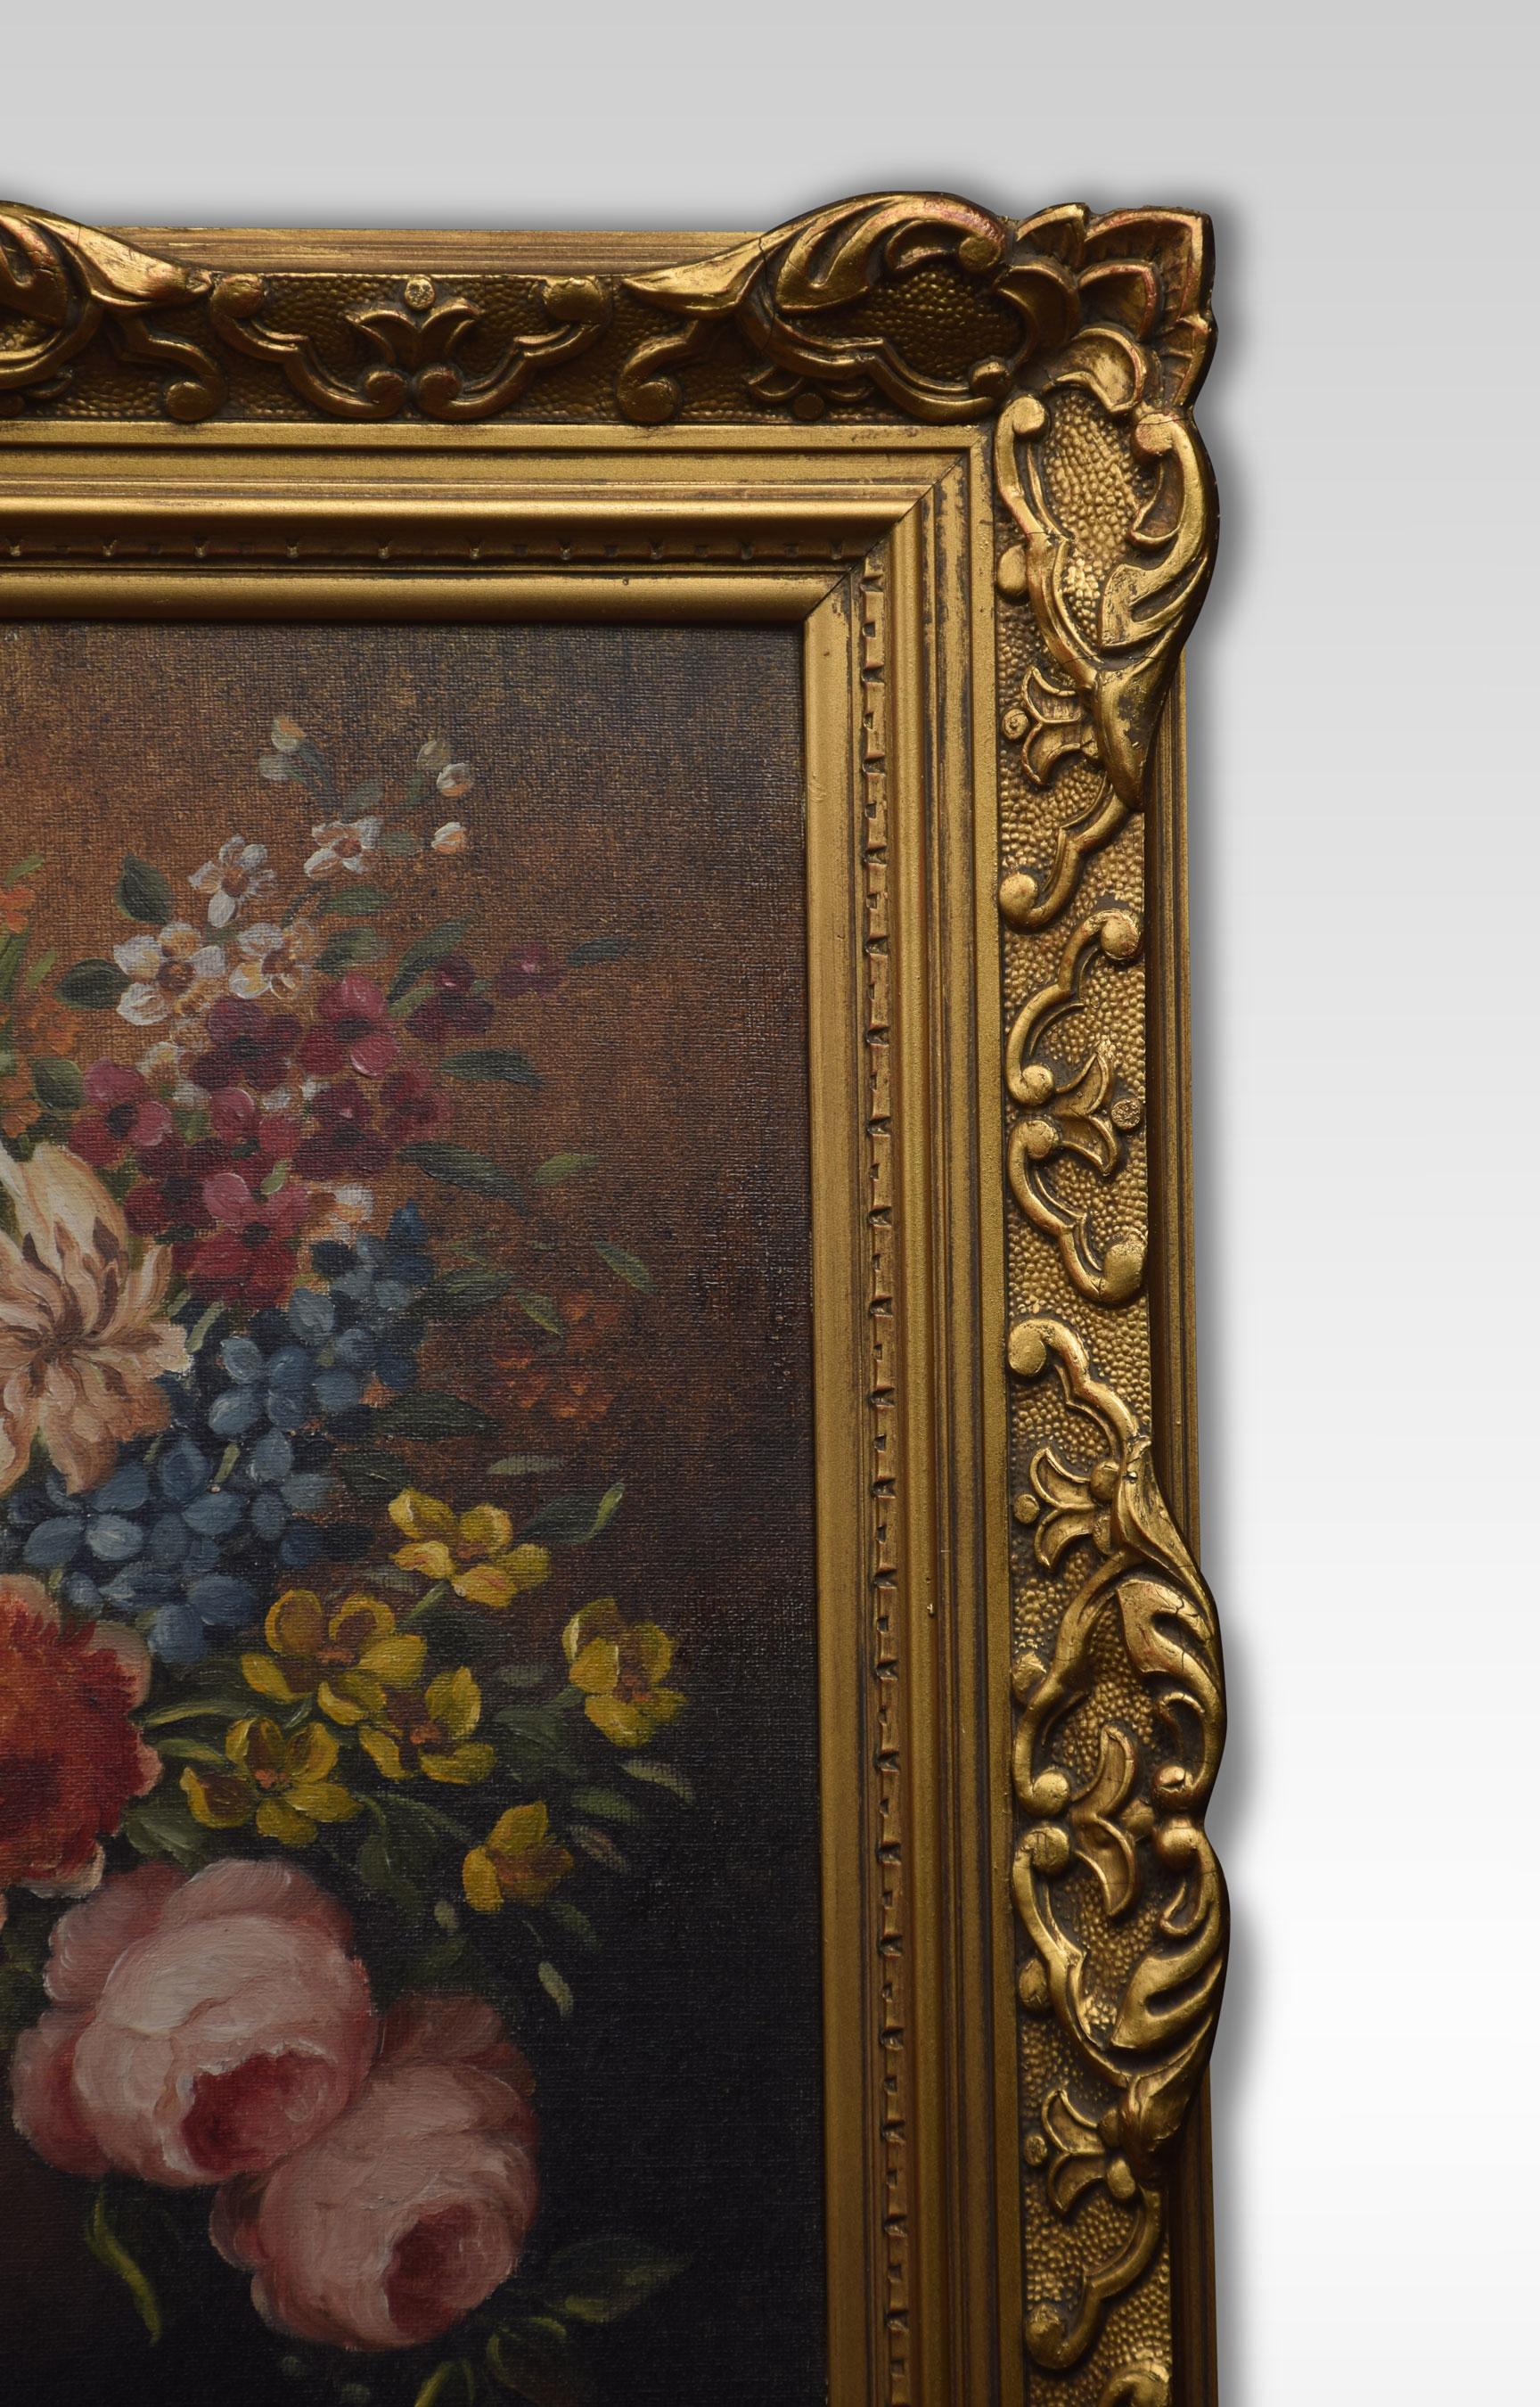 Still life of flowers signed J van Neesen encased in gilt frame.
Dimensions:
Height 26 inches
Width 22 inches
Depth 2 inches.